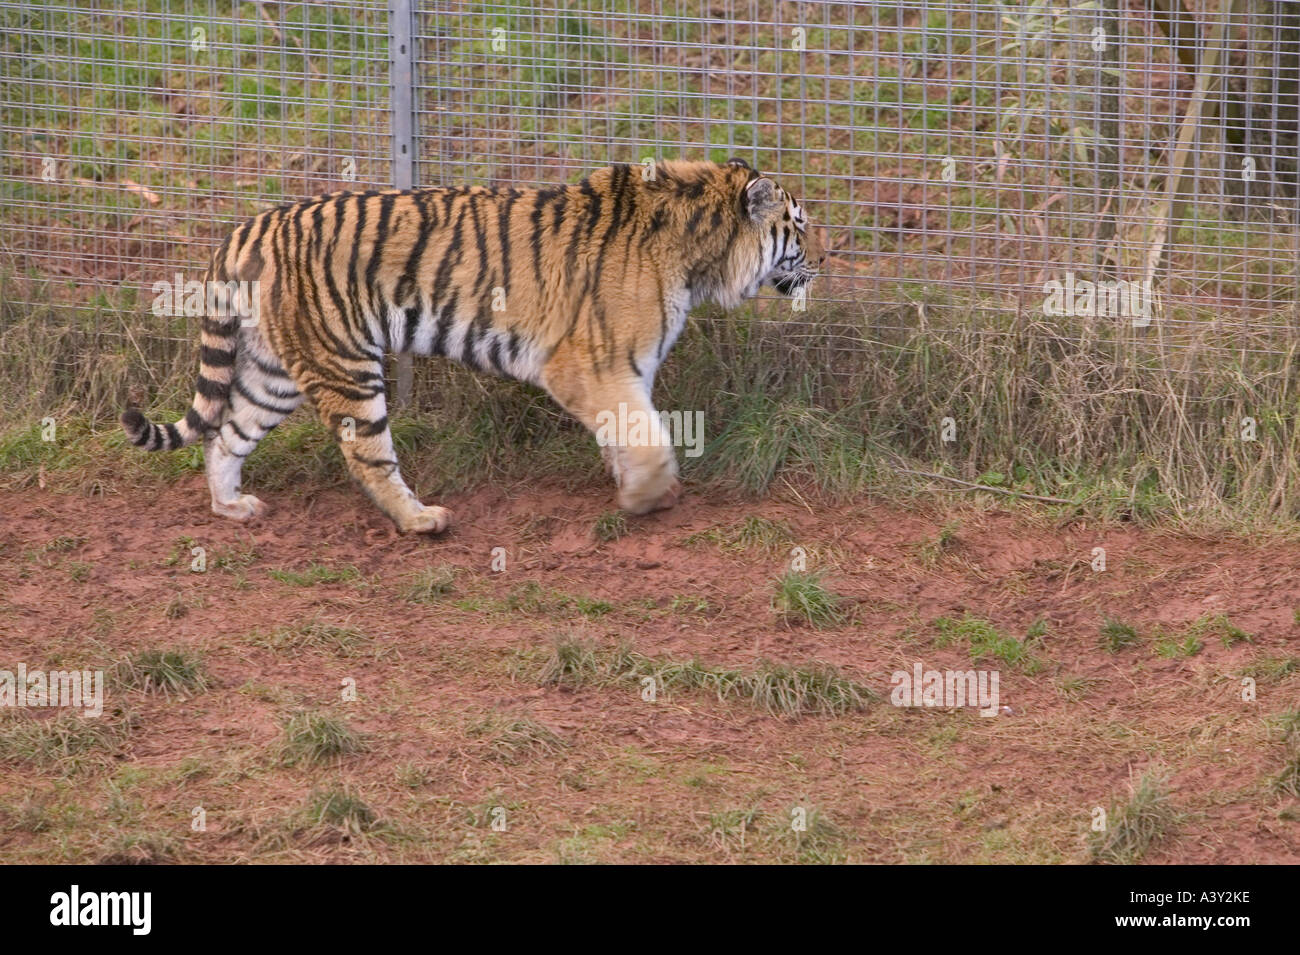 a Sumatran Tiger at a breeding project in Dalton in Furness, Cumbria, UK, paces up and down its enclosure Stock Photo